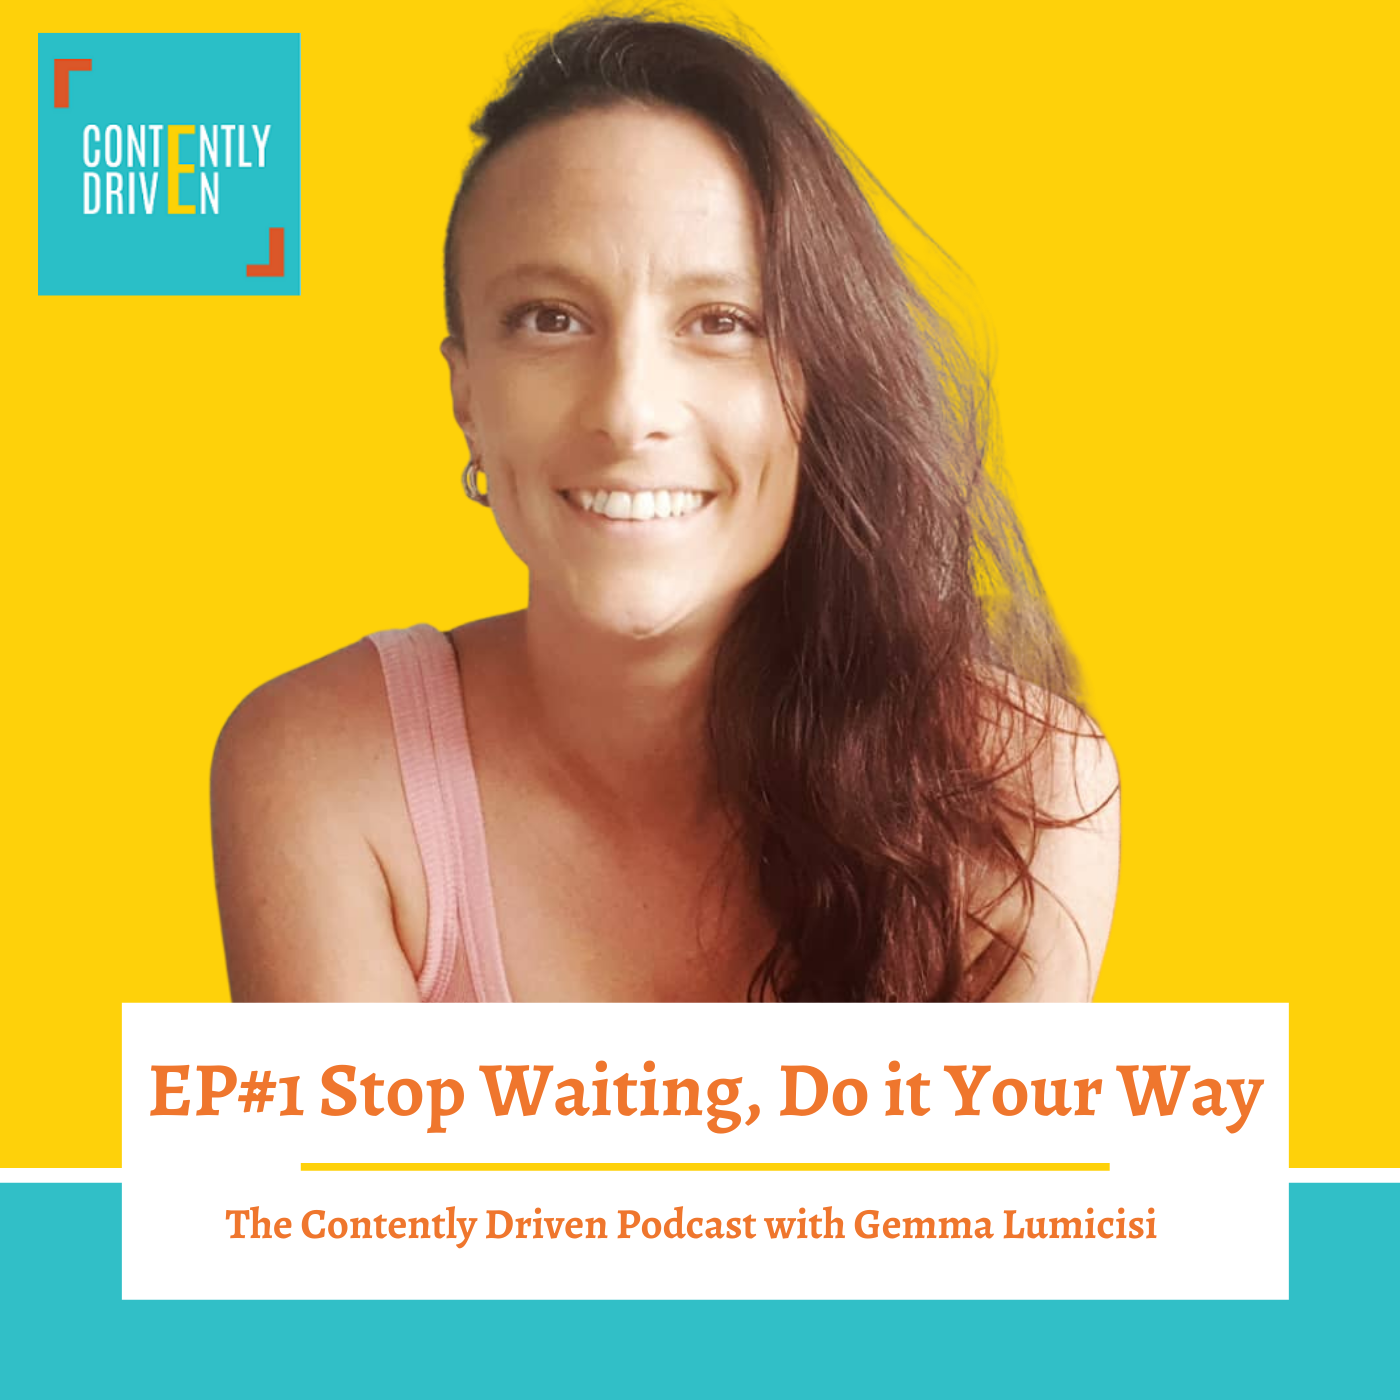 The Contently Driven Podcast